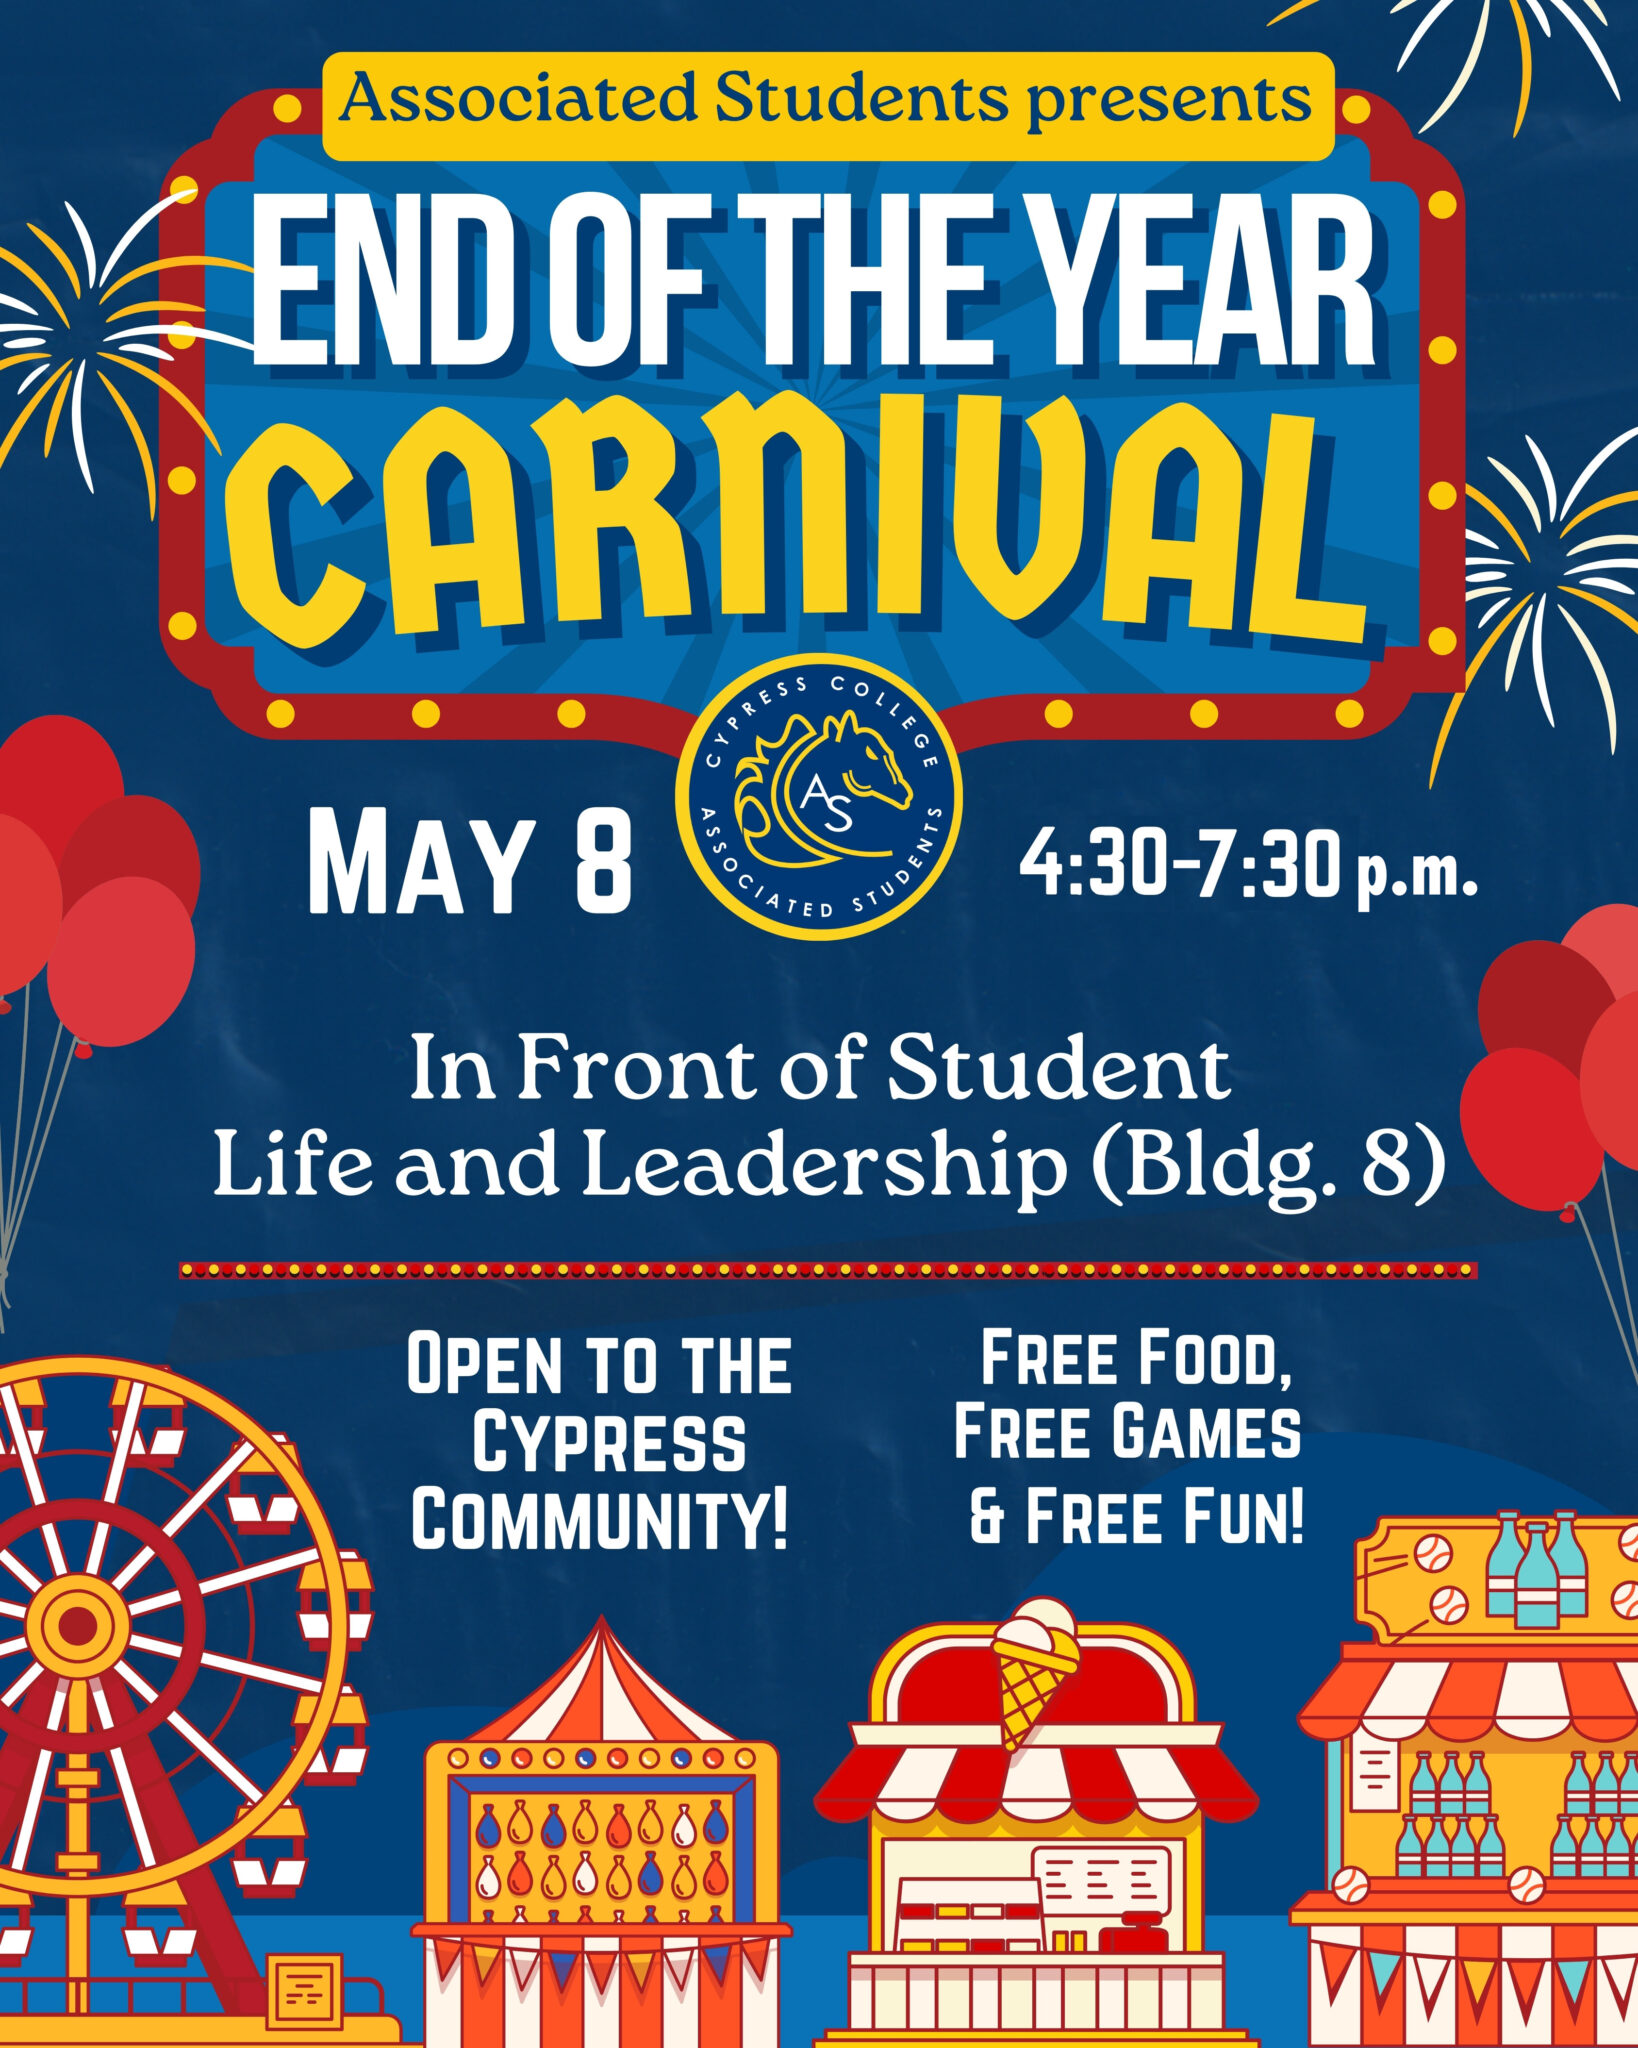 End of the year carnival flyer